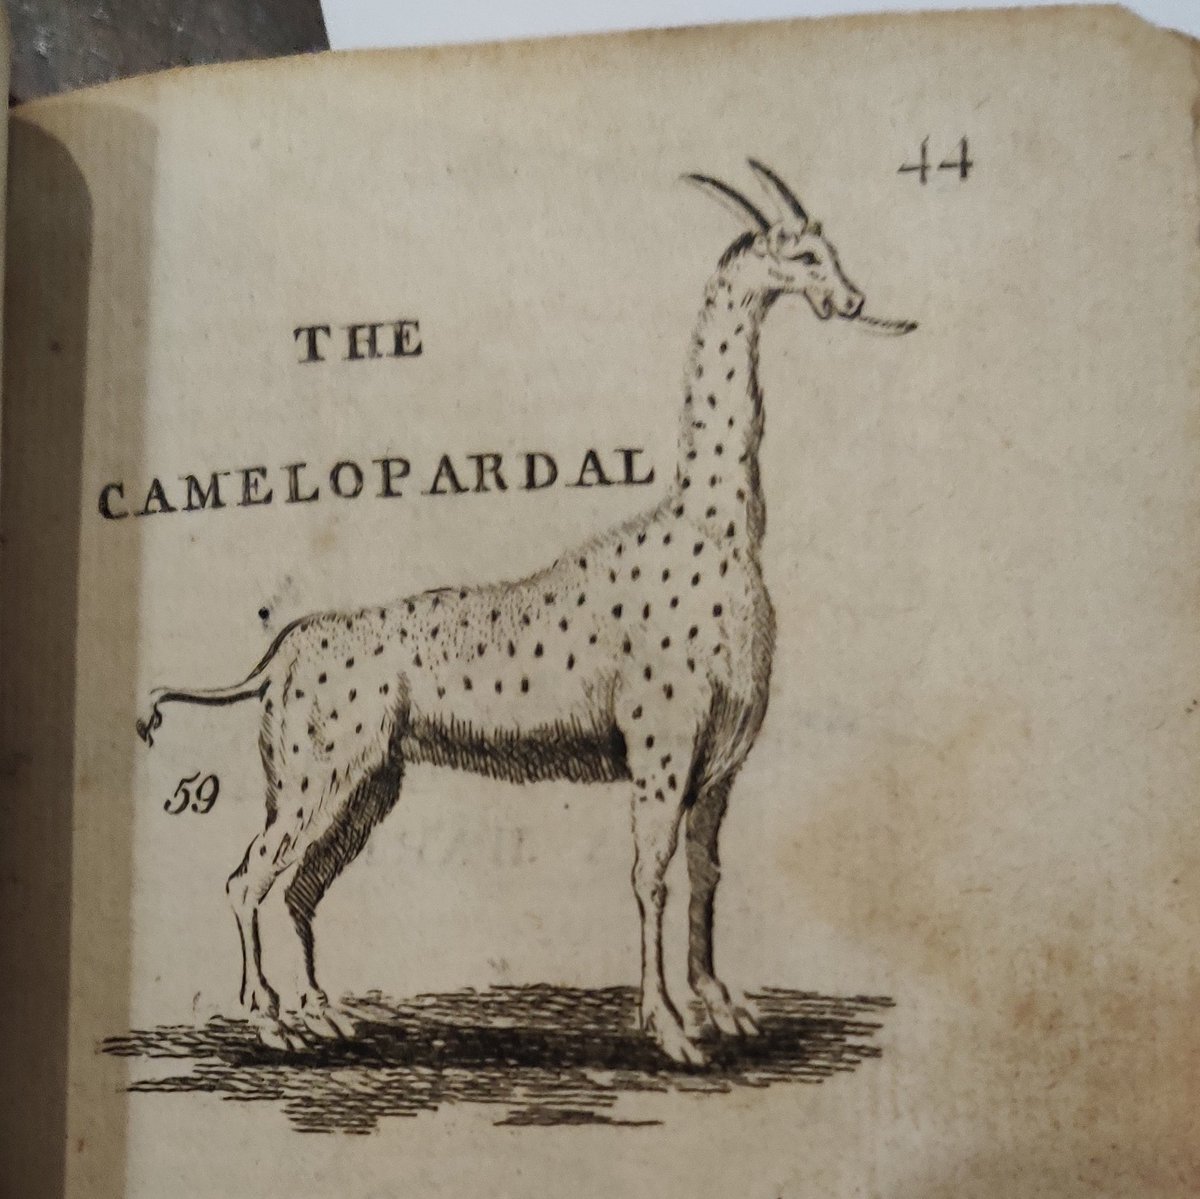 I don't really know what a Camelopardal is because he describes it as being a bit like a panther and idk about you but I am not 100% convinced